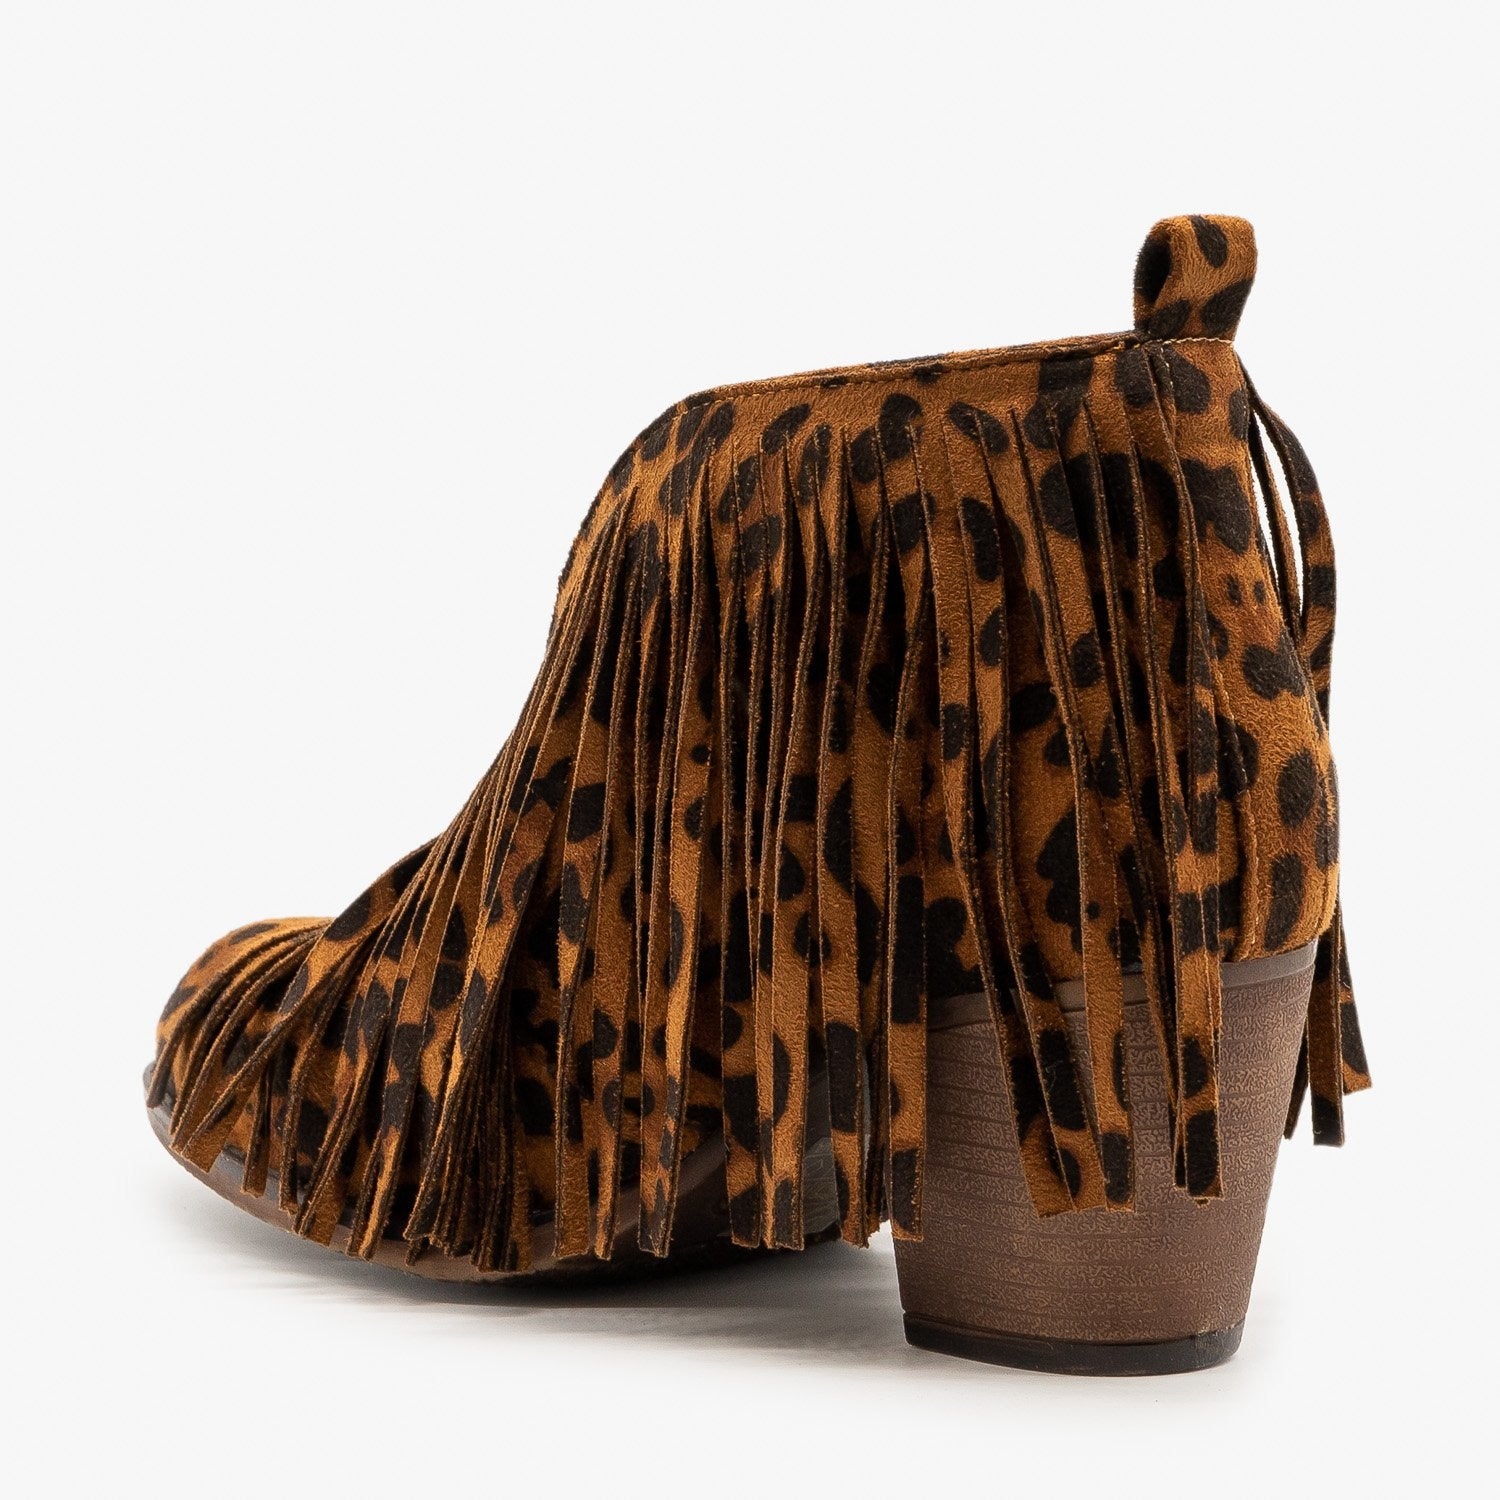 leopard print booties with fringe